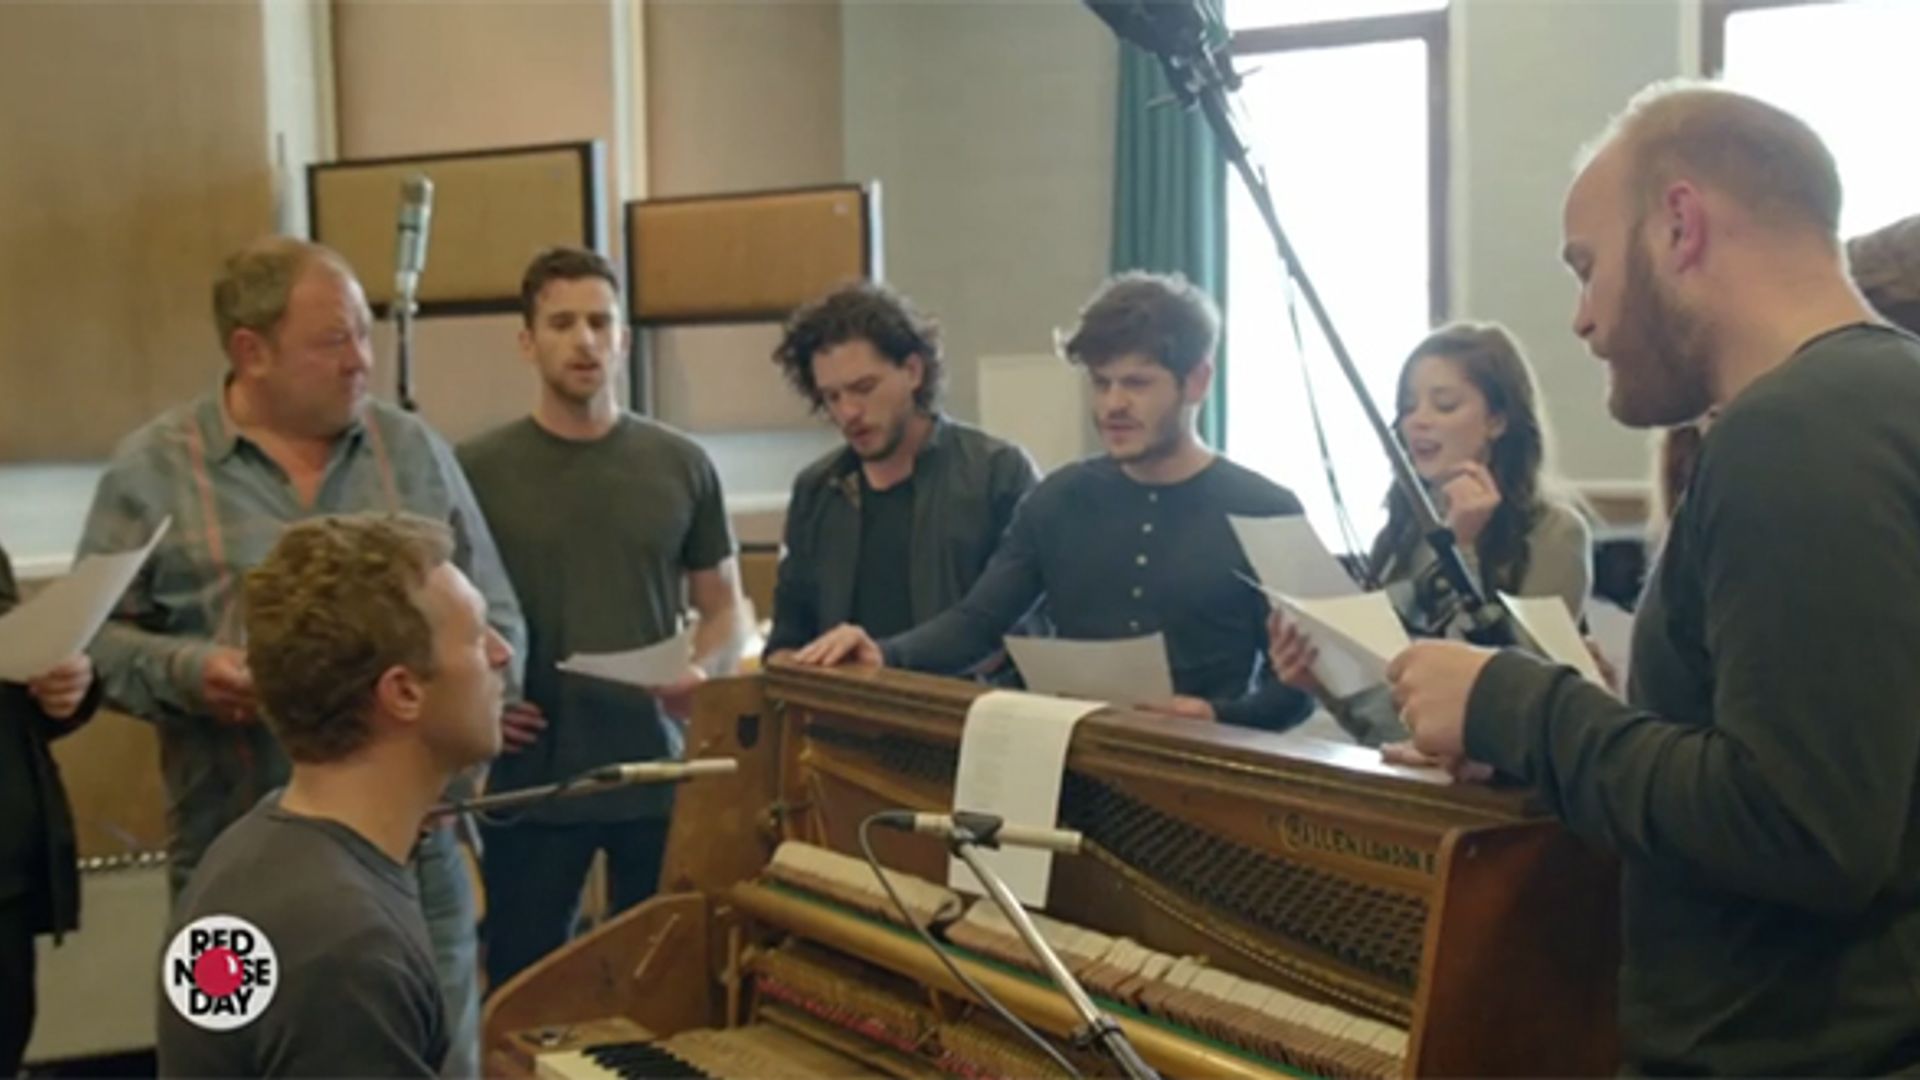 halskæde skive skelet Coldplay create Game of Thrones musical for Red Nose Day USA | HELLO!